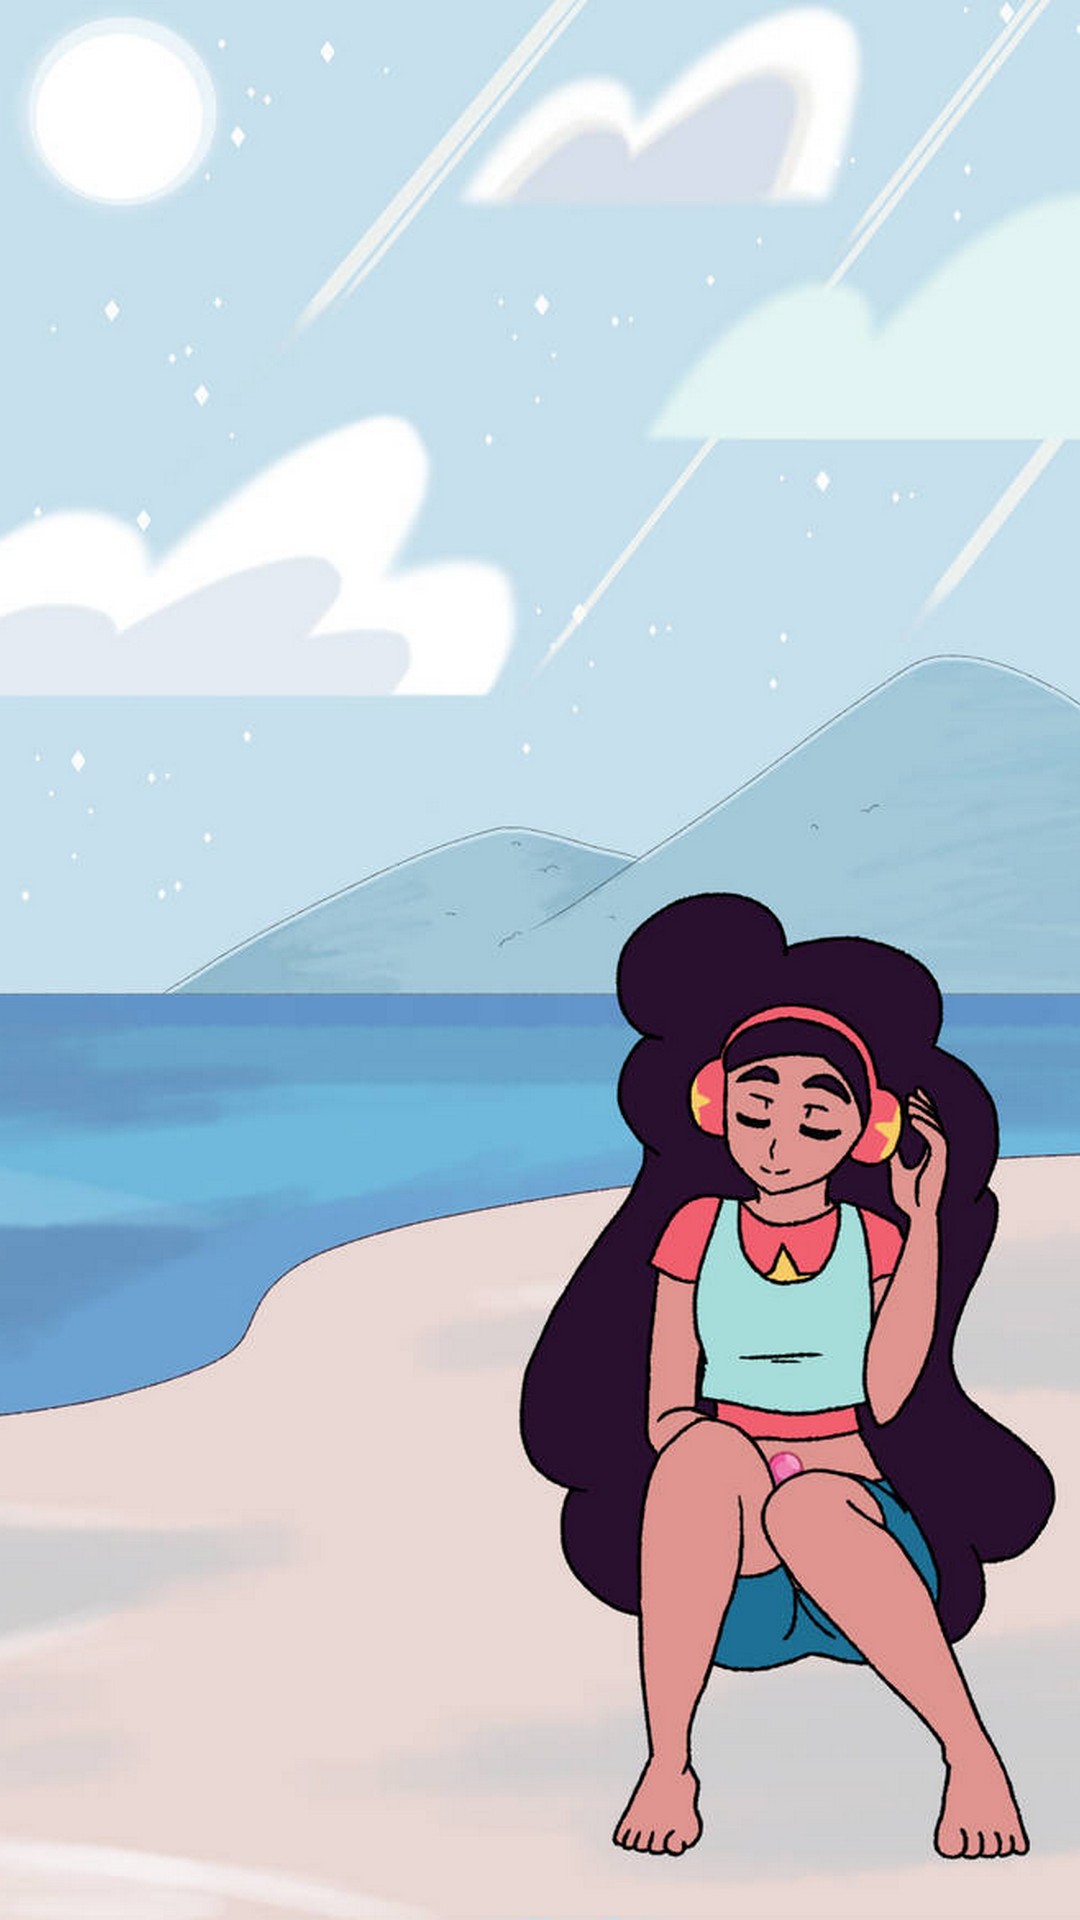 Steven Universe iPhone Wallpaper HD with high-resolution 1080x1920 pixel. You can set as wallpaper for Apple iPhone X, XS Max, XR, 8, 7, 6, SE, iPad. Enjoy and share your favorite HD wallpapers and background images